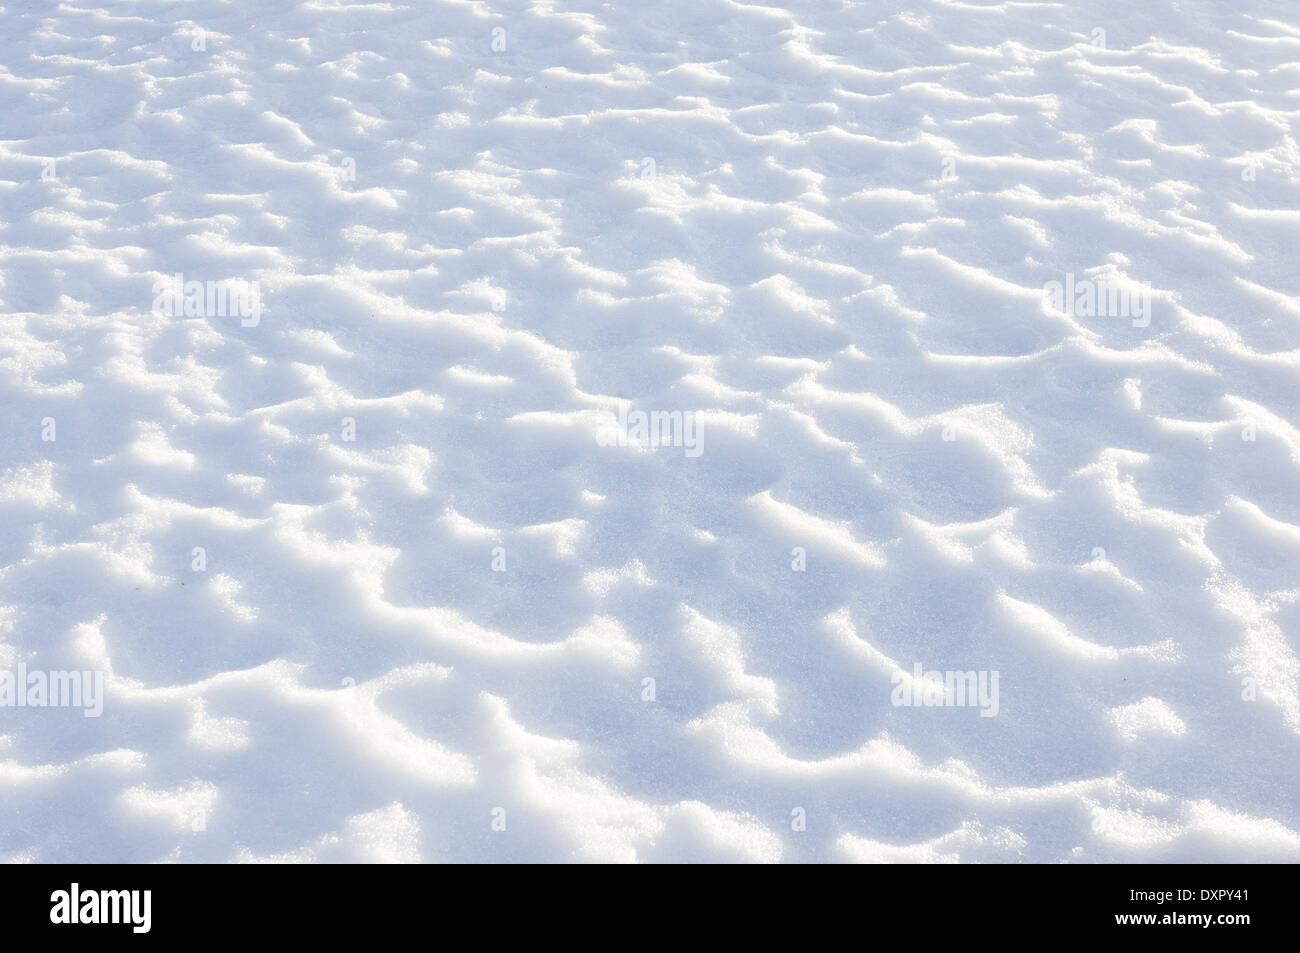 winter abstract landscape with snow textures Stock Photo